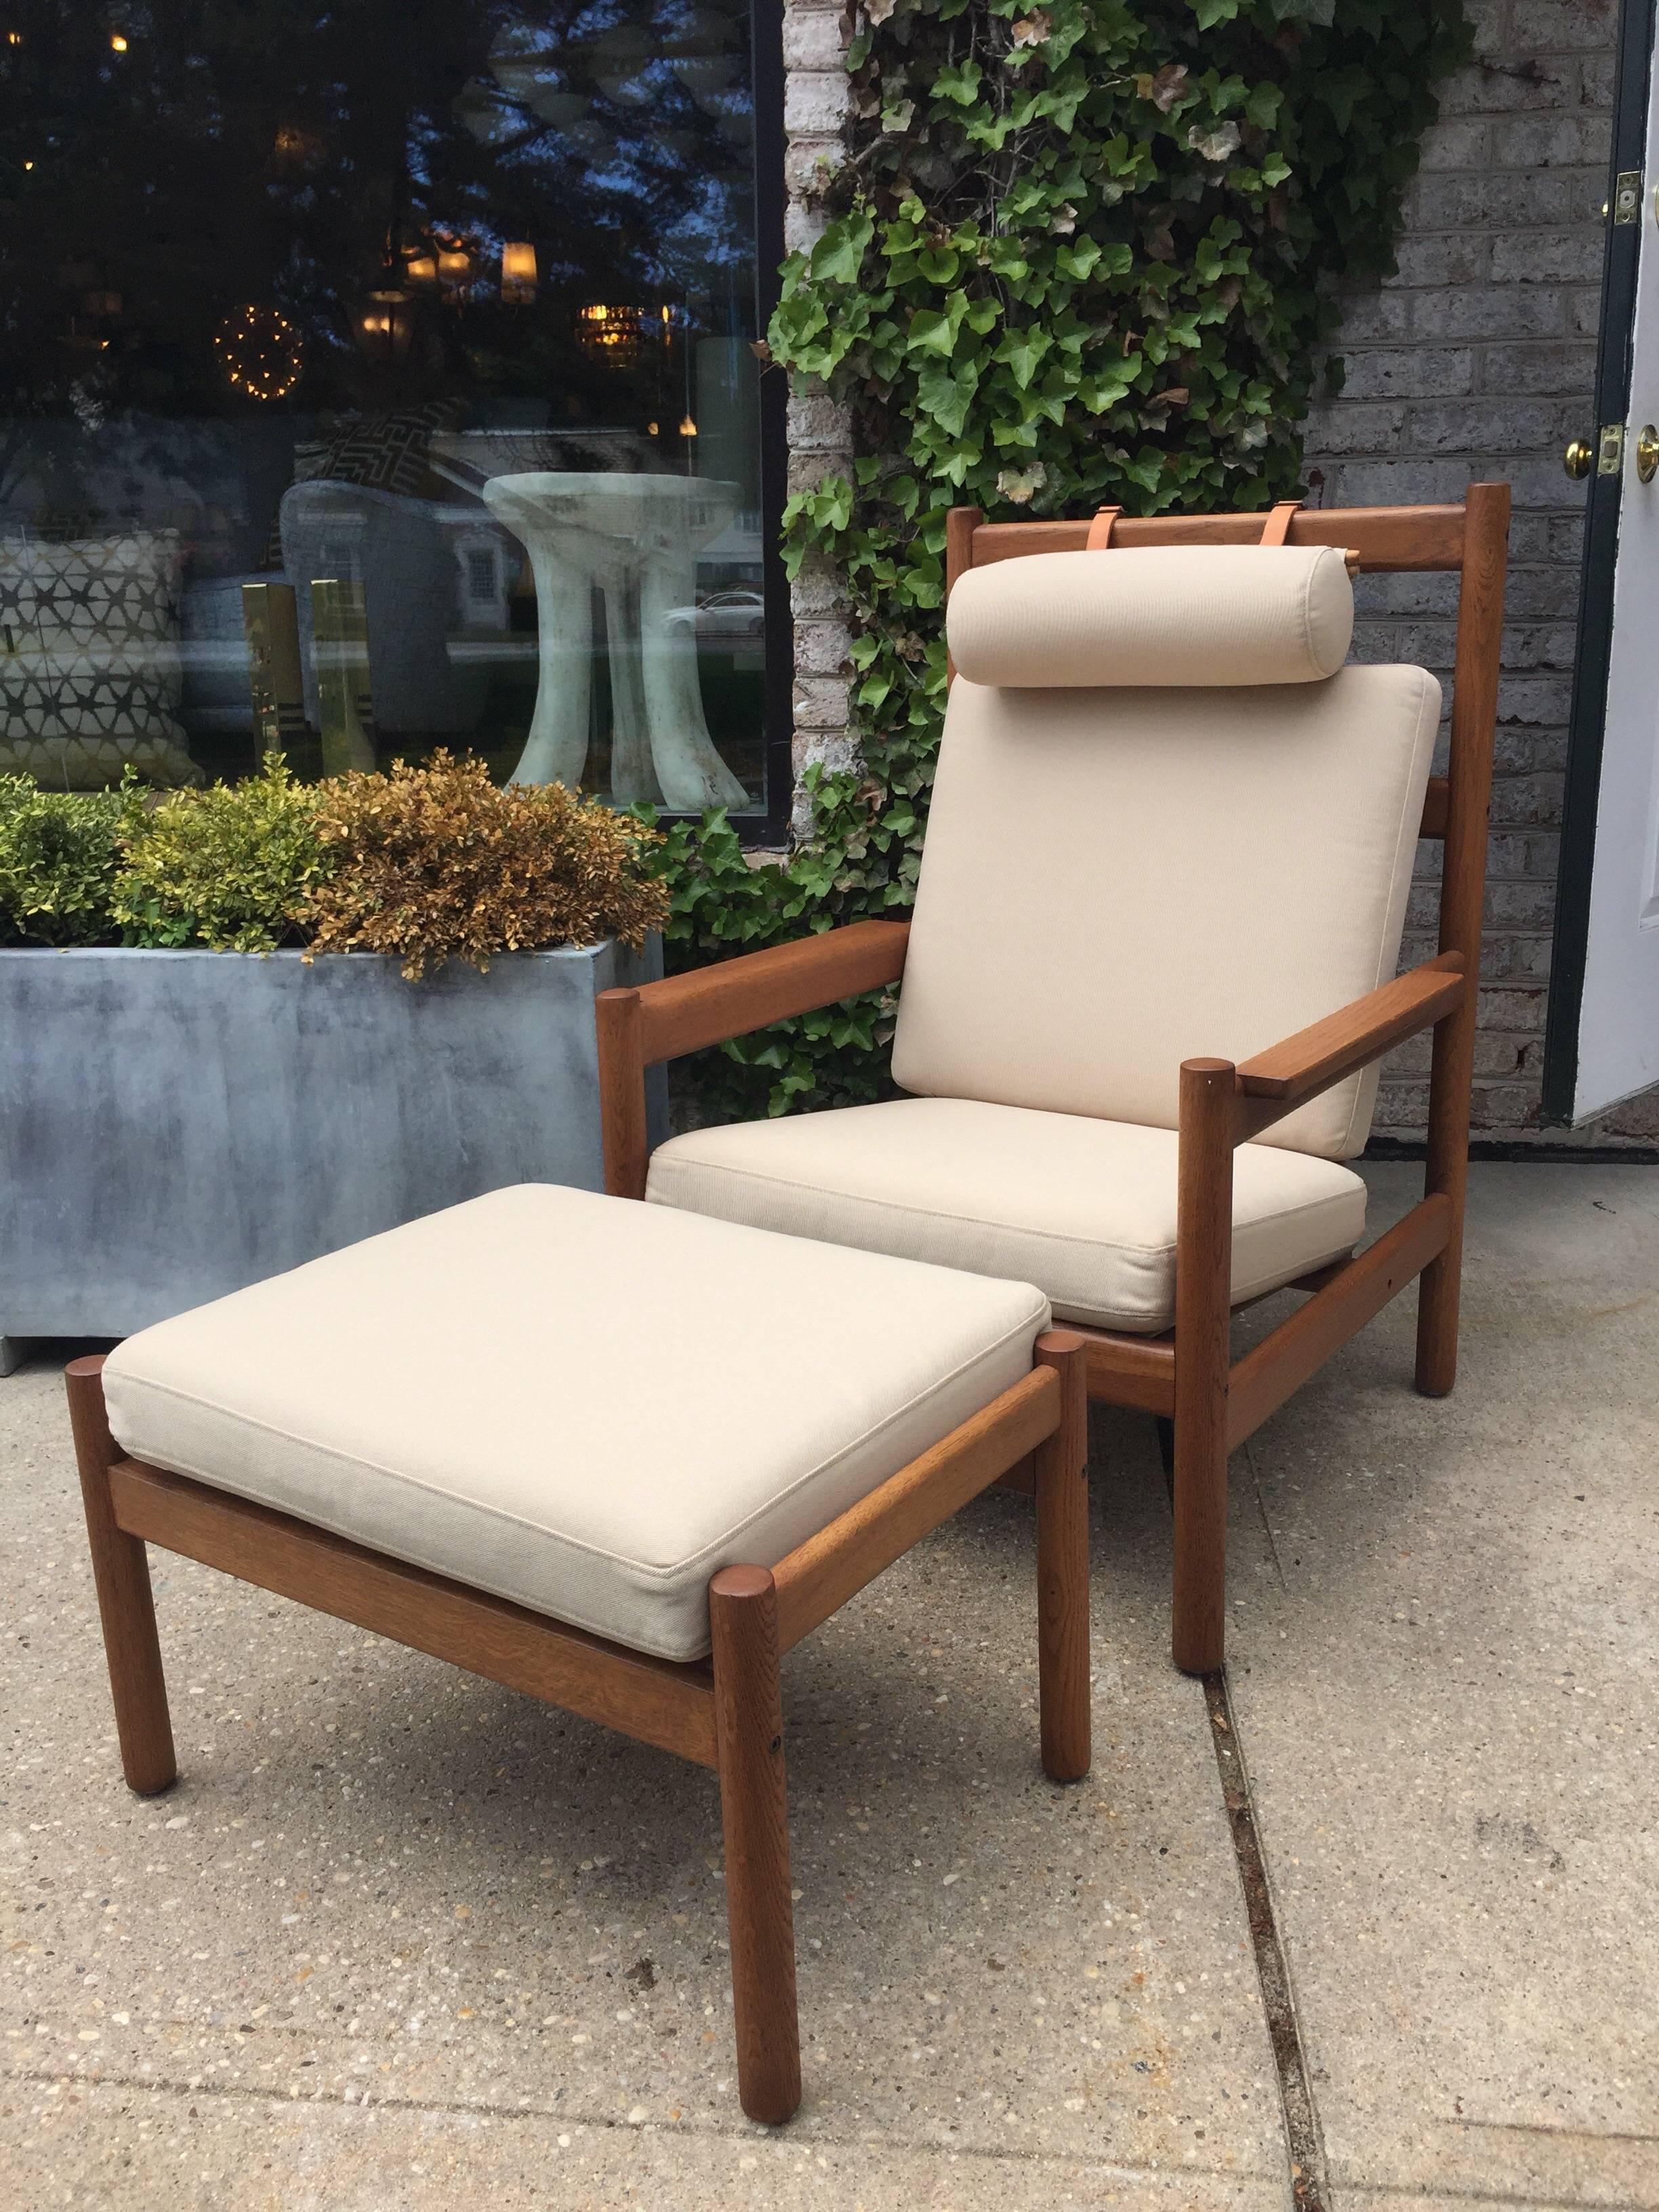 Rare Vintage Arne Norell Teak Armchair and Ottoman with Leather Straps For Sale 1